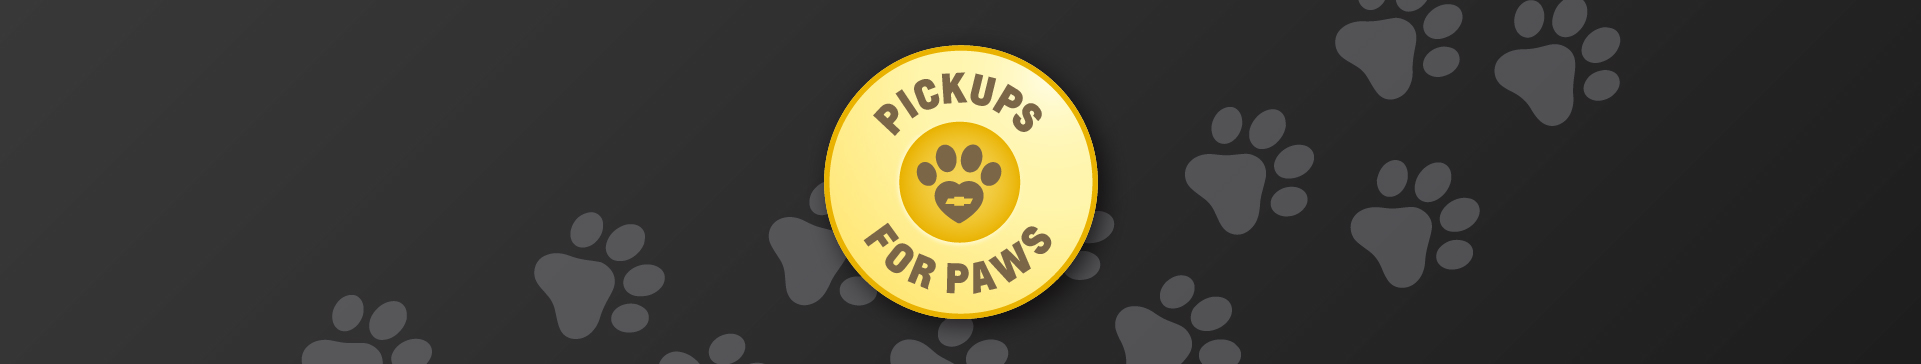 Pickups for Paws